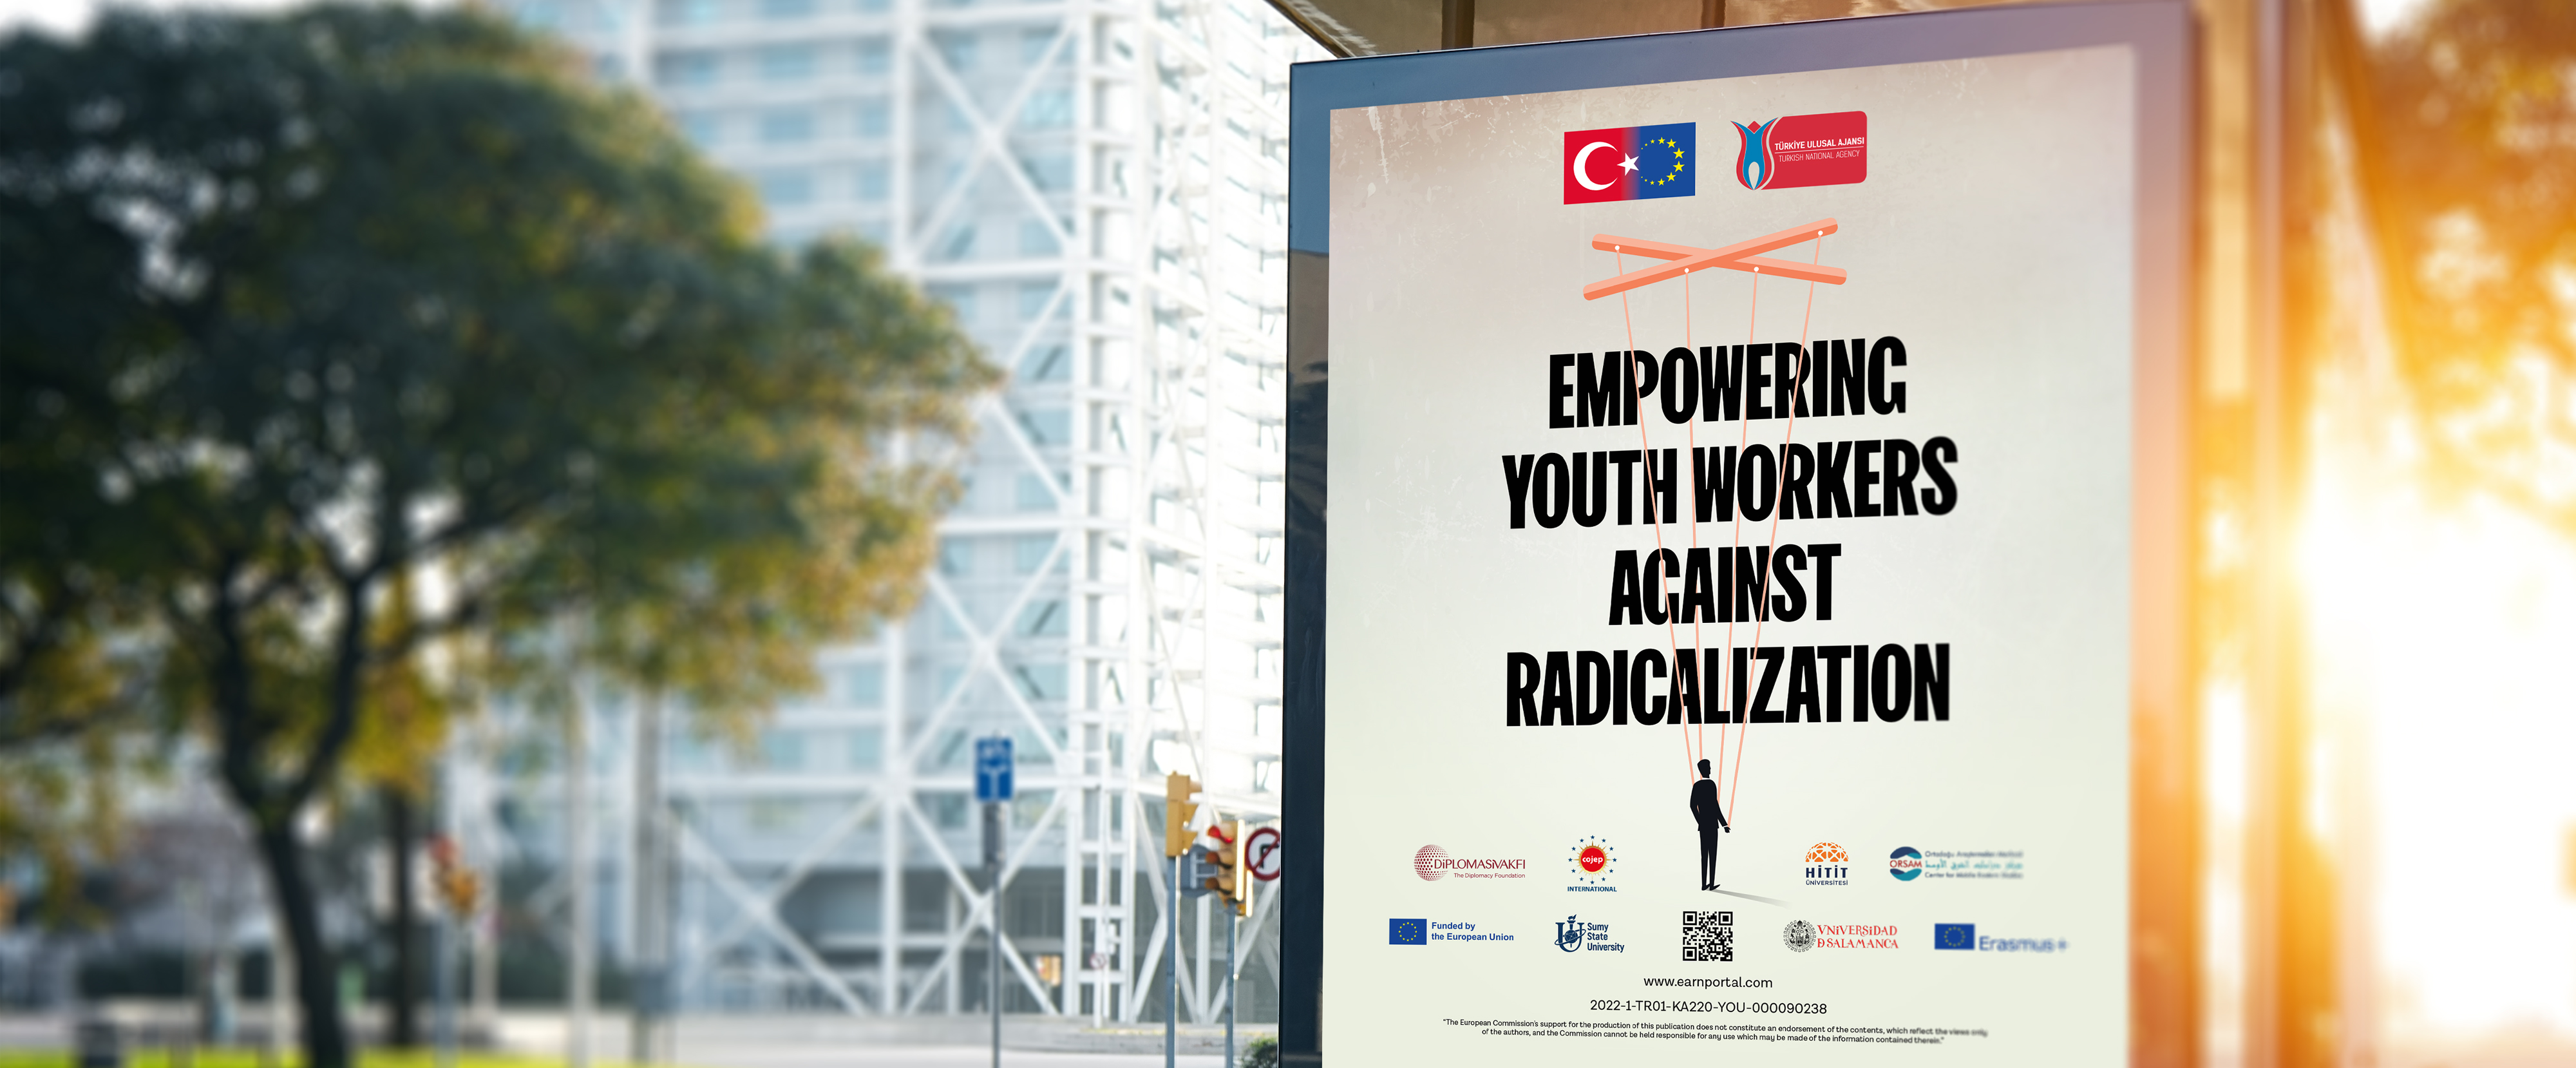 Empowering Youth Workers Against Radicalization